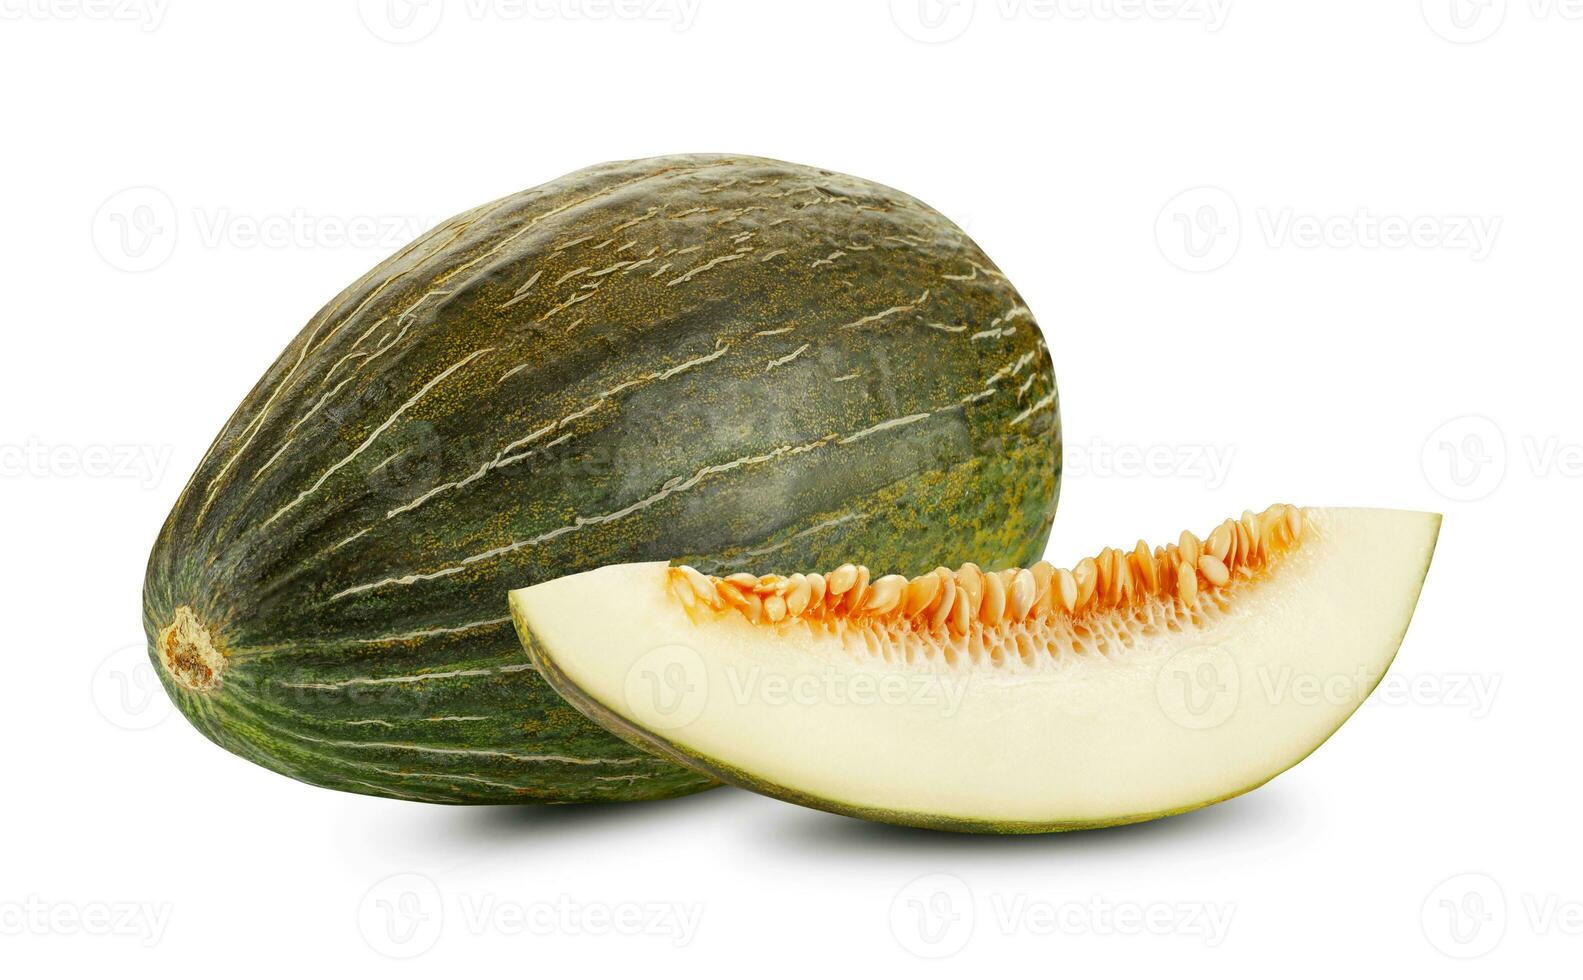 Delicious green tendral melon in cross-section, isolated on white background with copy space for text or images. Side view. Close-up shot. photo